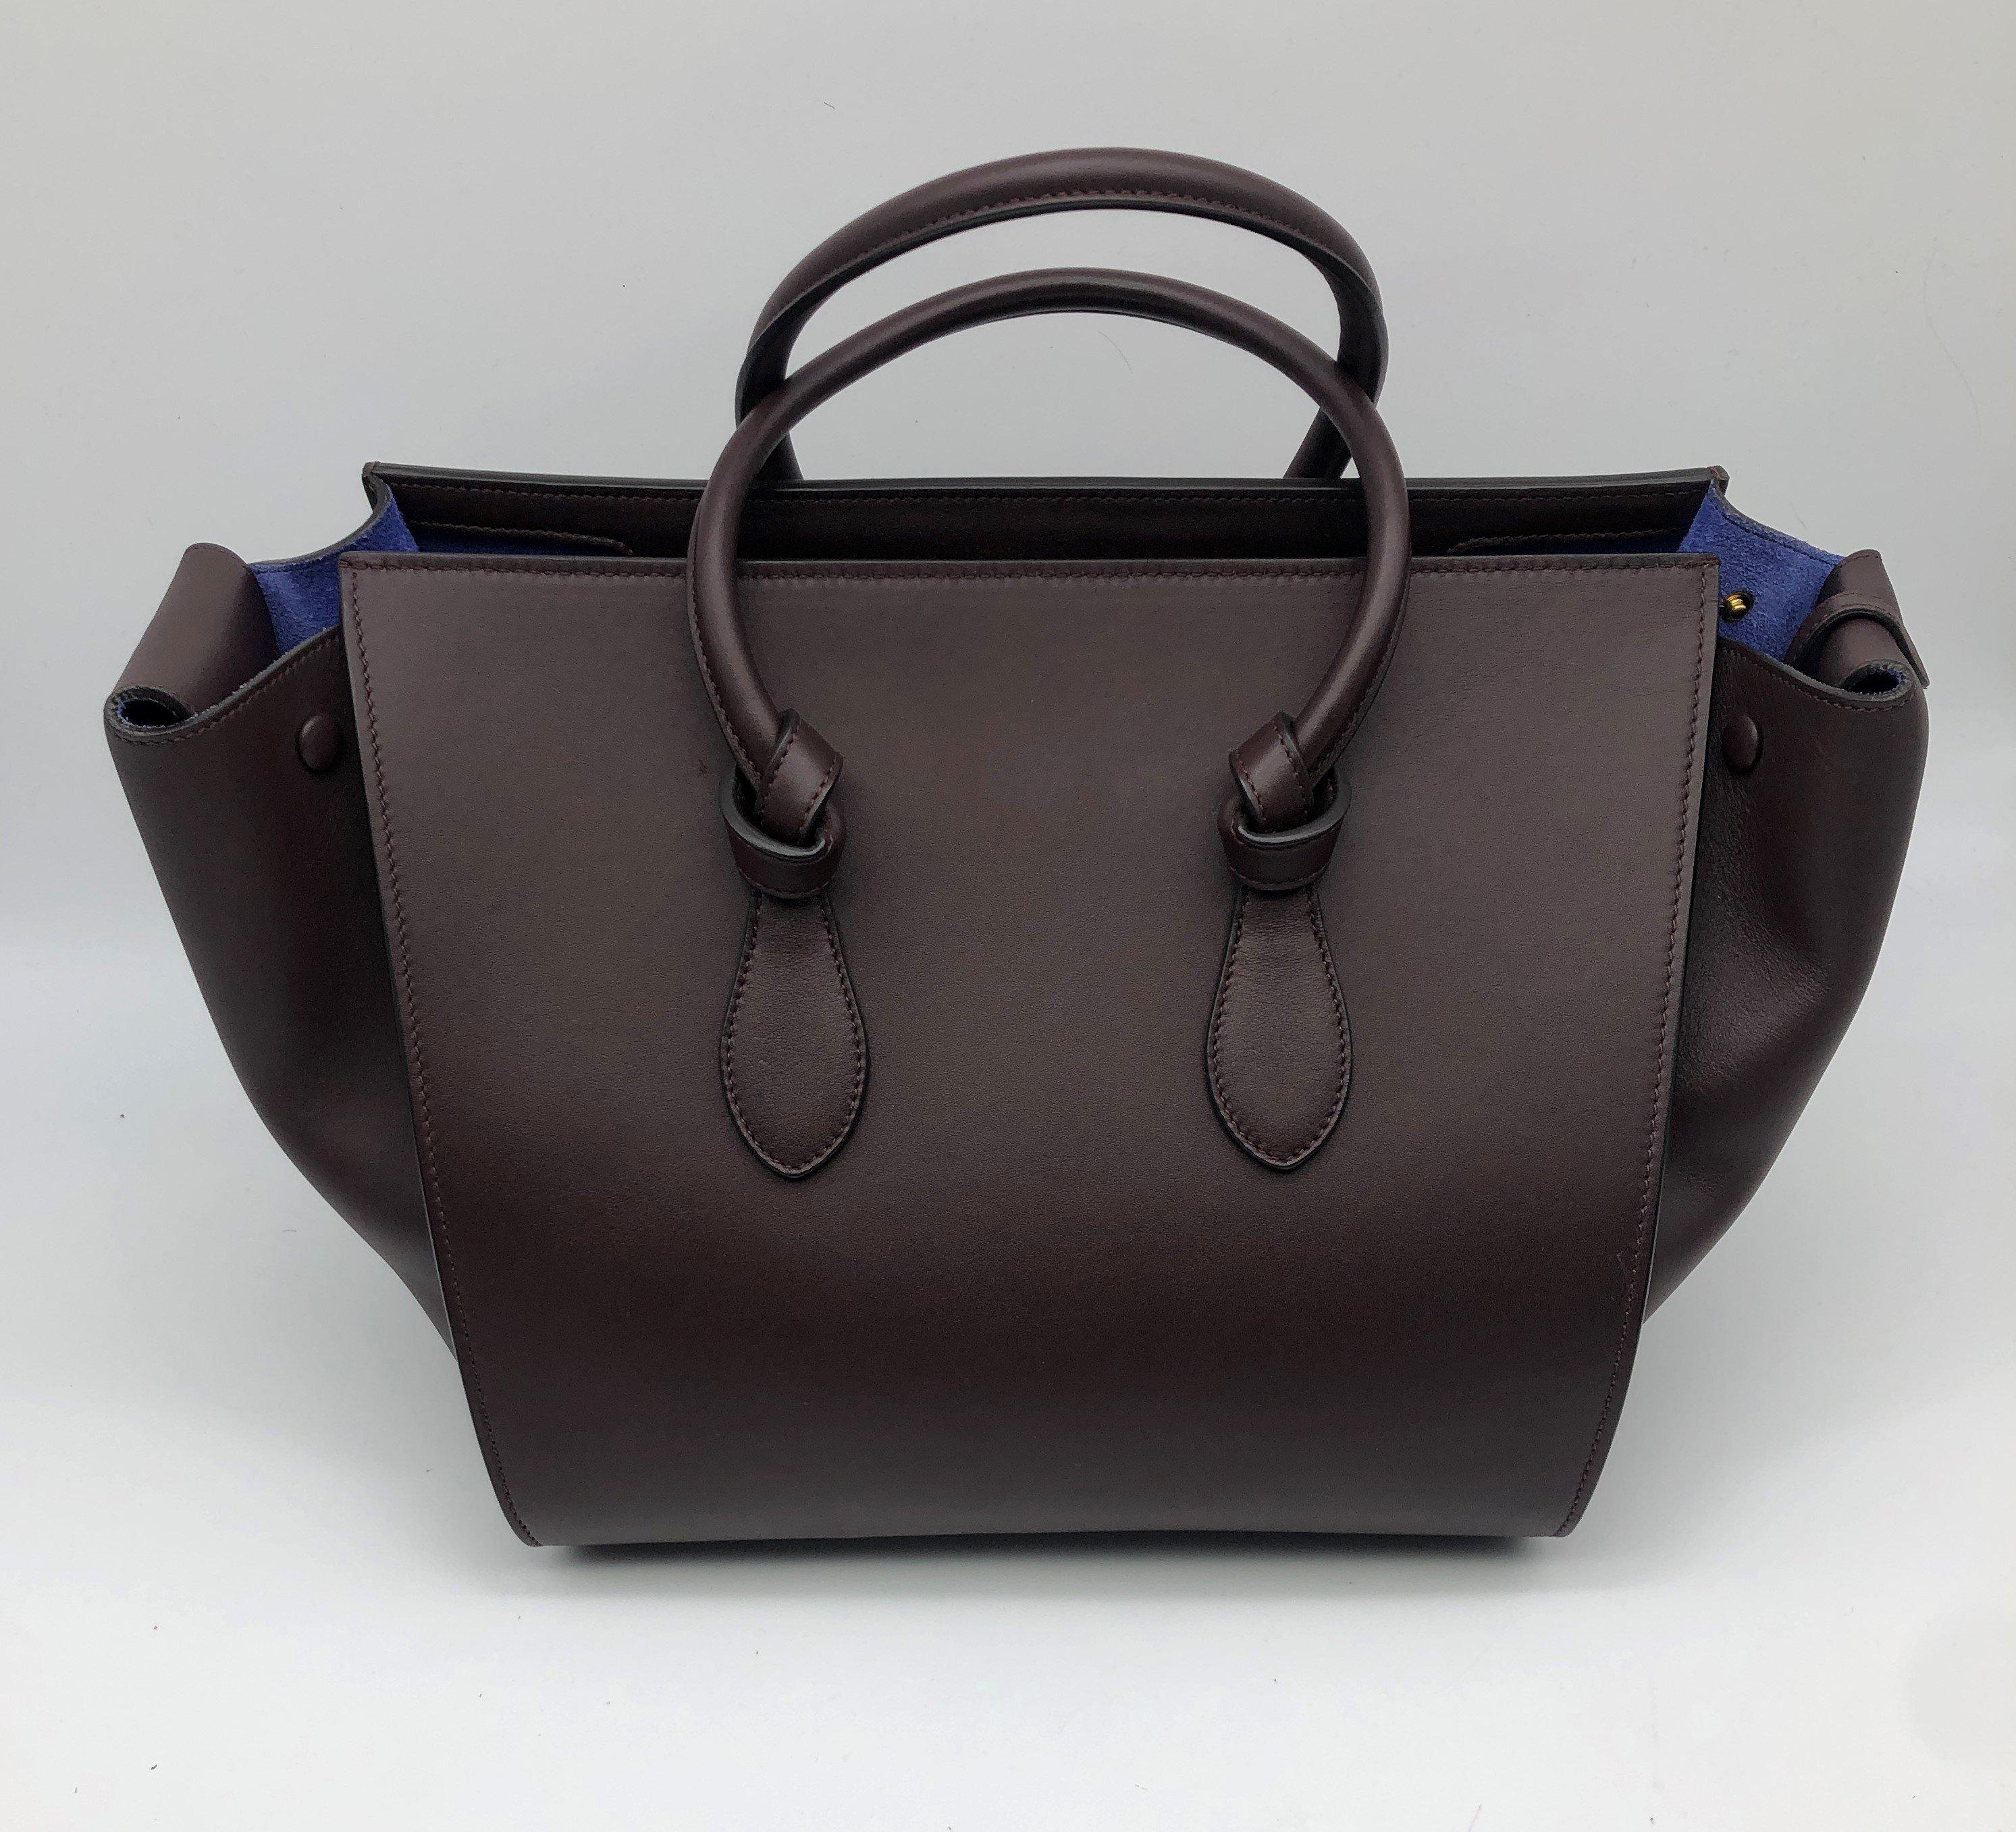 - Designer: CÉLINE
- Model: Tie
- Condition: Very good condition. Sign of wear on base corners
- Accessories: Dustbag
- Measurements: Width: 34cm, Height: 25cm, Depth: 17cm
- Exterior Material: Leather
- Exterior Color: Burgundy
- Interior Material: